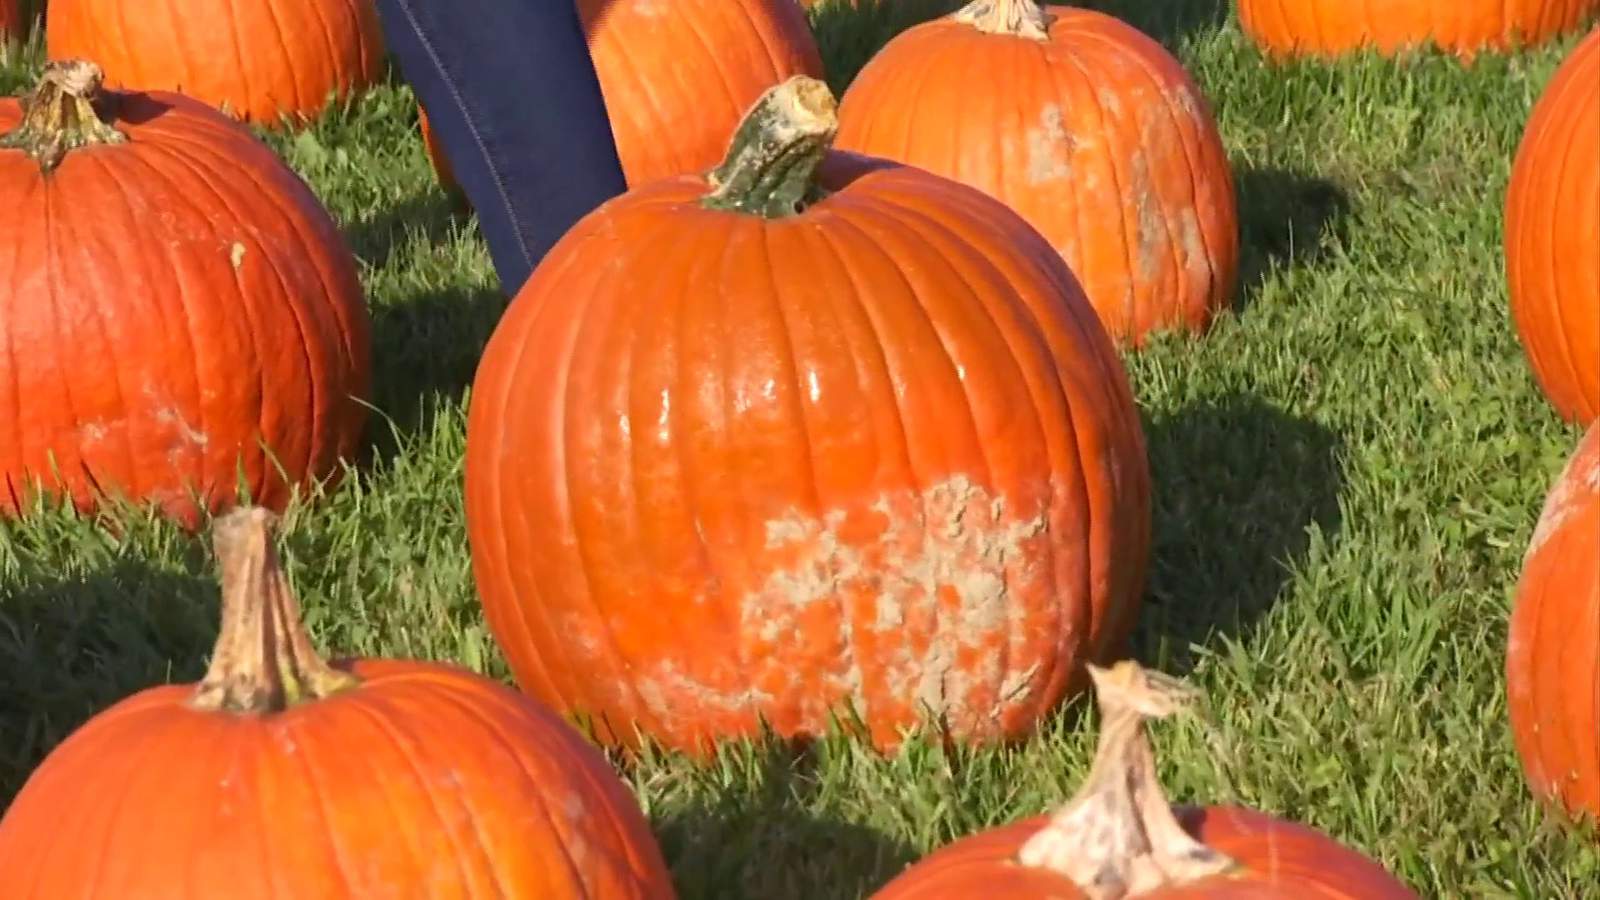 Fall fun reaches new heights at Wytheville family farm